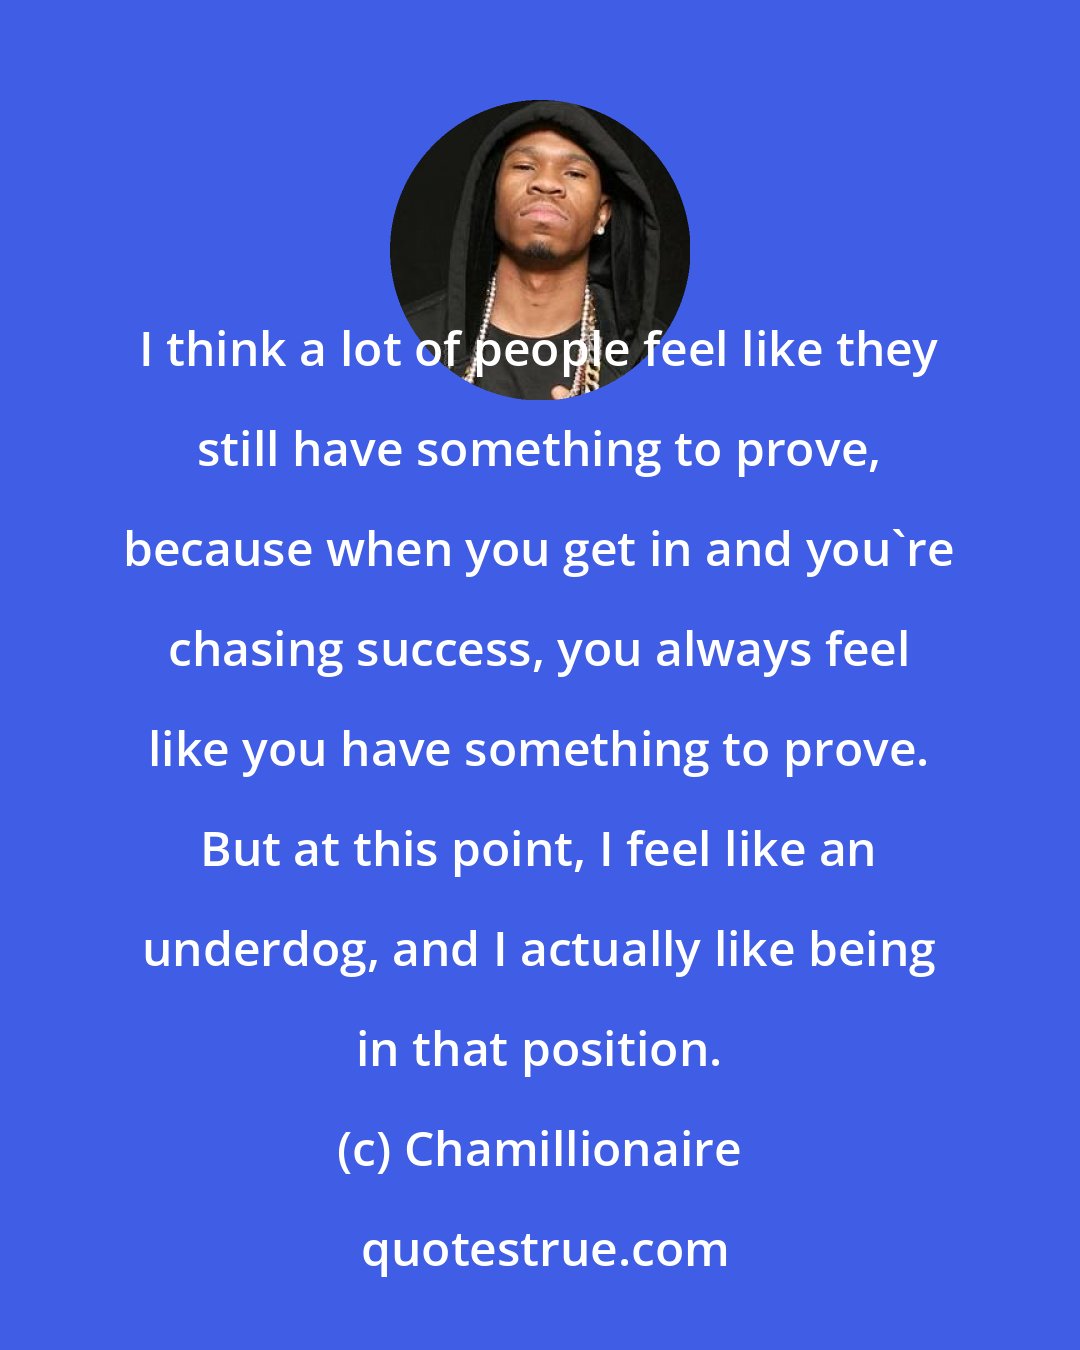 Chamillionaire: I think a lot of people feel like they still have something to prove, because when you get in and you're chasing success, you always feel like you have something to prove. But at this point, I feel like an underdog, and I actually like being in that position.